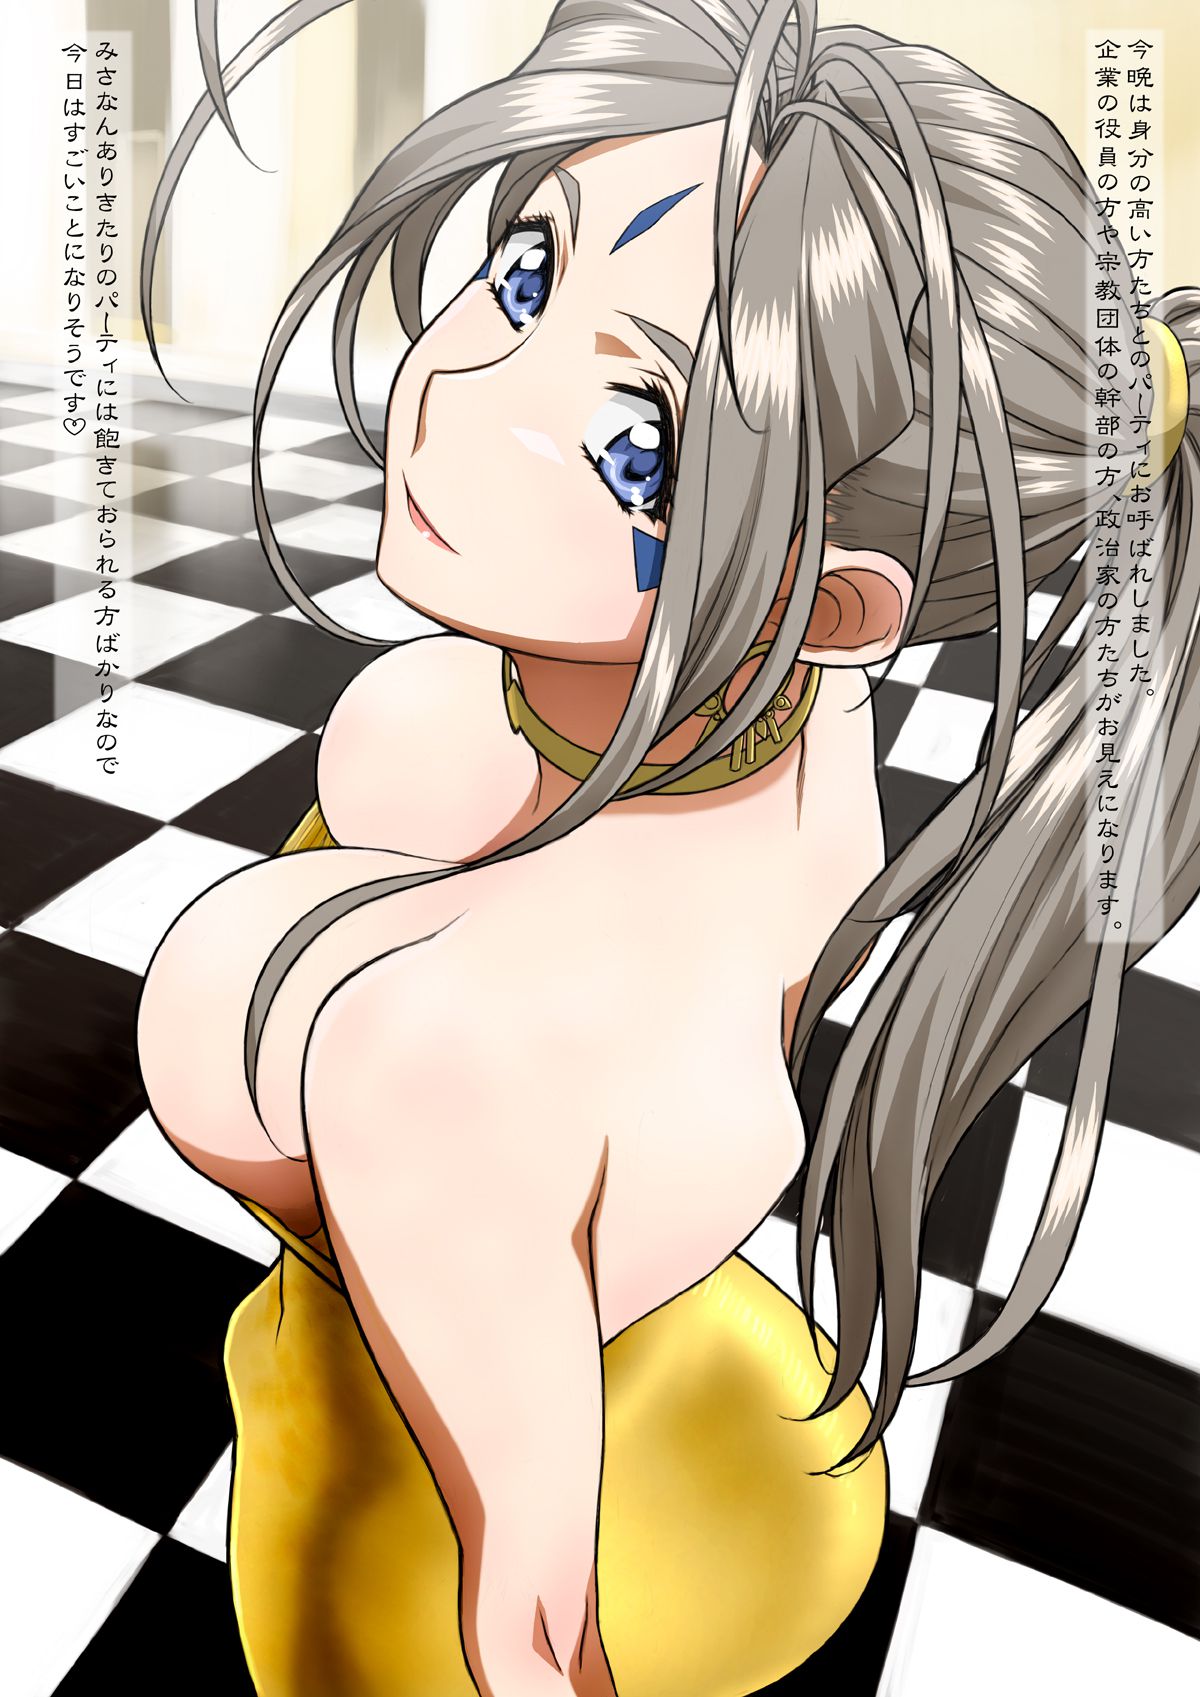 "Oh I goddess!» I'll show you expose in sex with love ahegao belldandy! 8